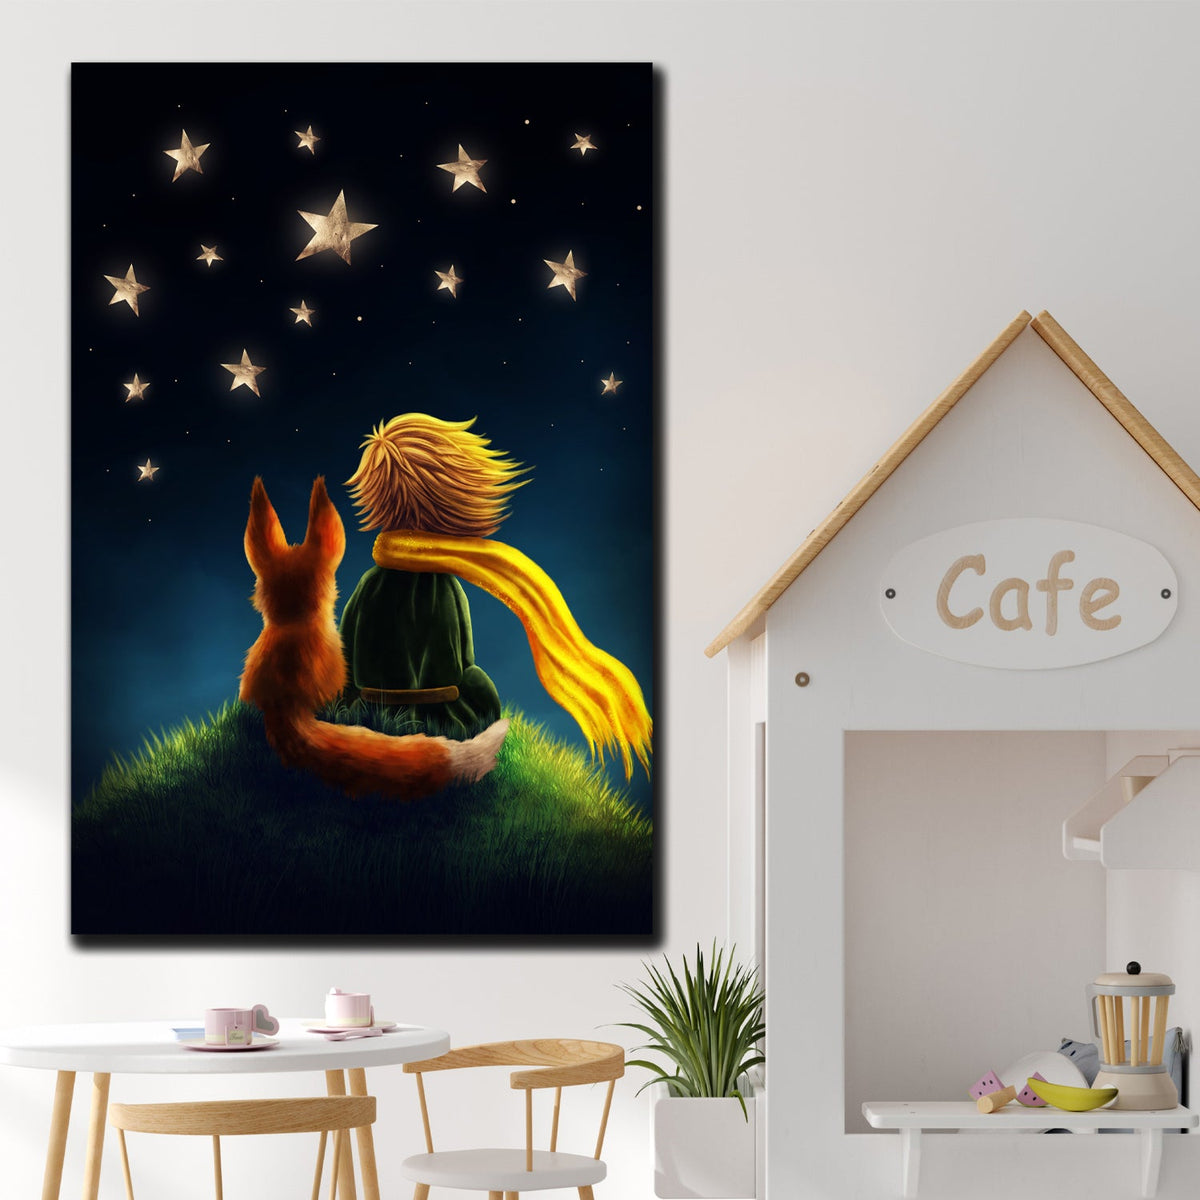 https://cdn.shopify.com/s/files/1/0387/9986/8044/products/TheLittlePrinceCanvasArtprintStretched-2.jpg